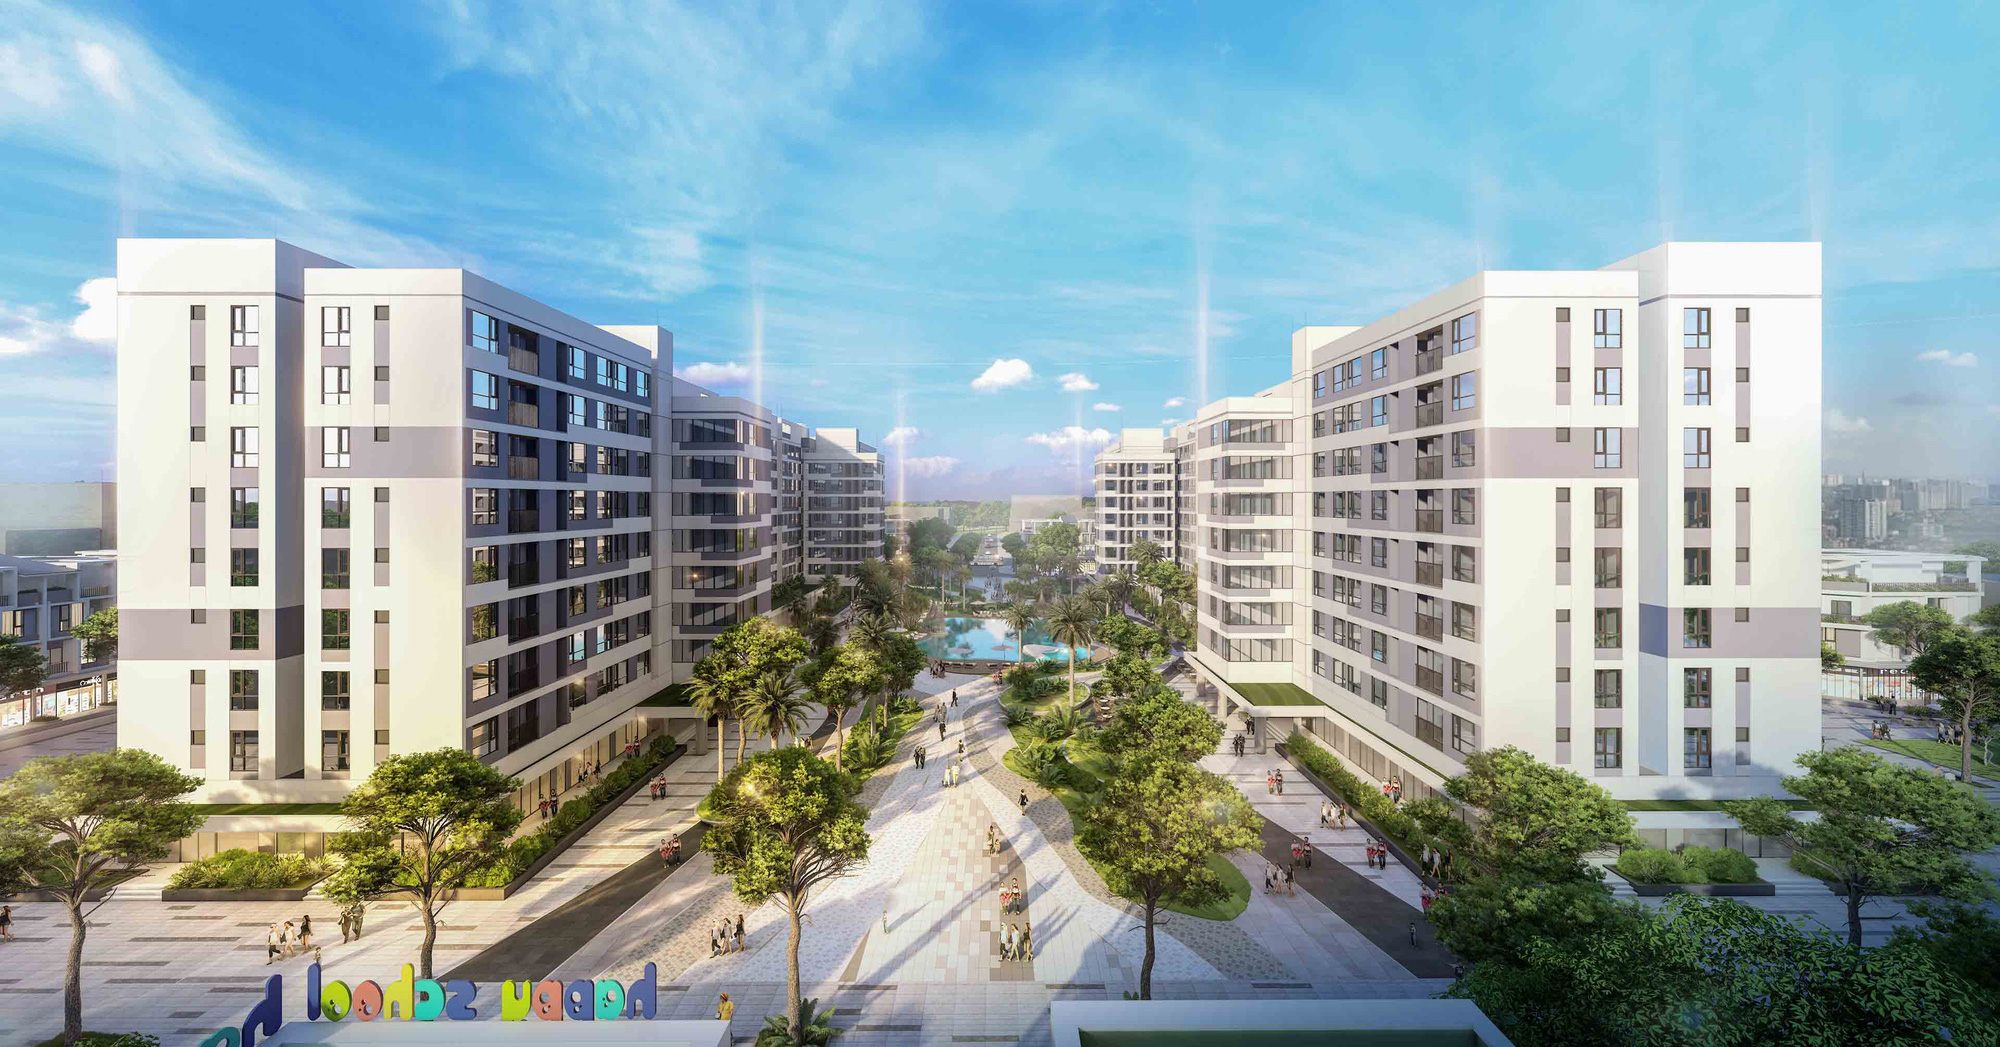 Groundbreaking ceremony for modern social housing area of ​​564 apartments in Ha Nam